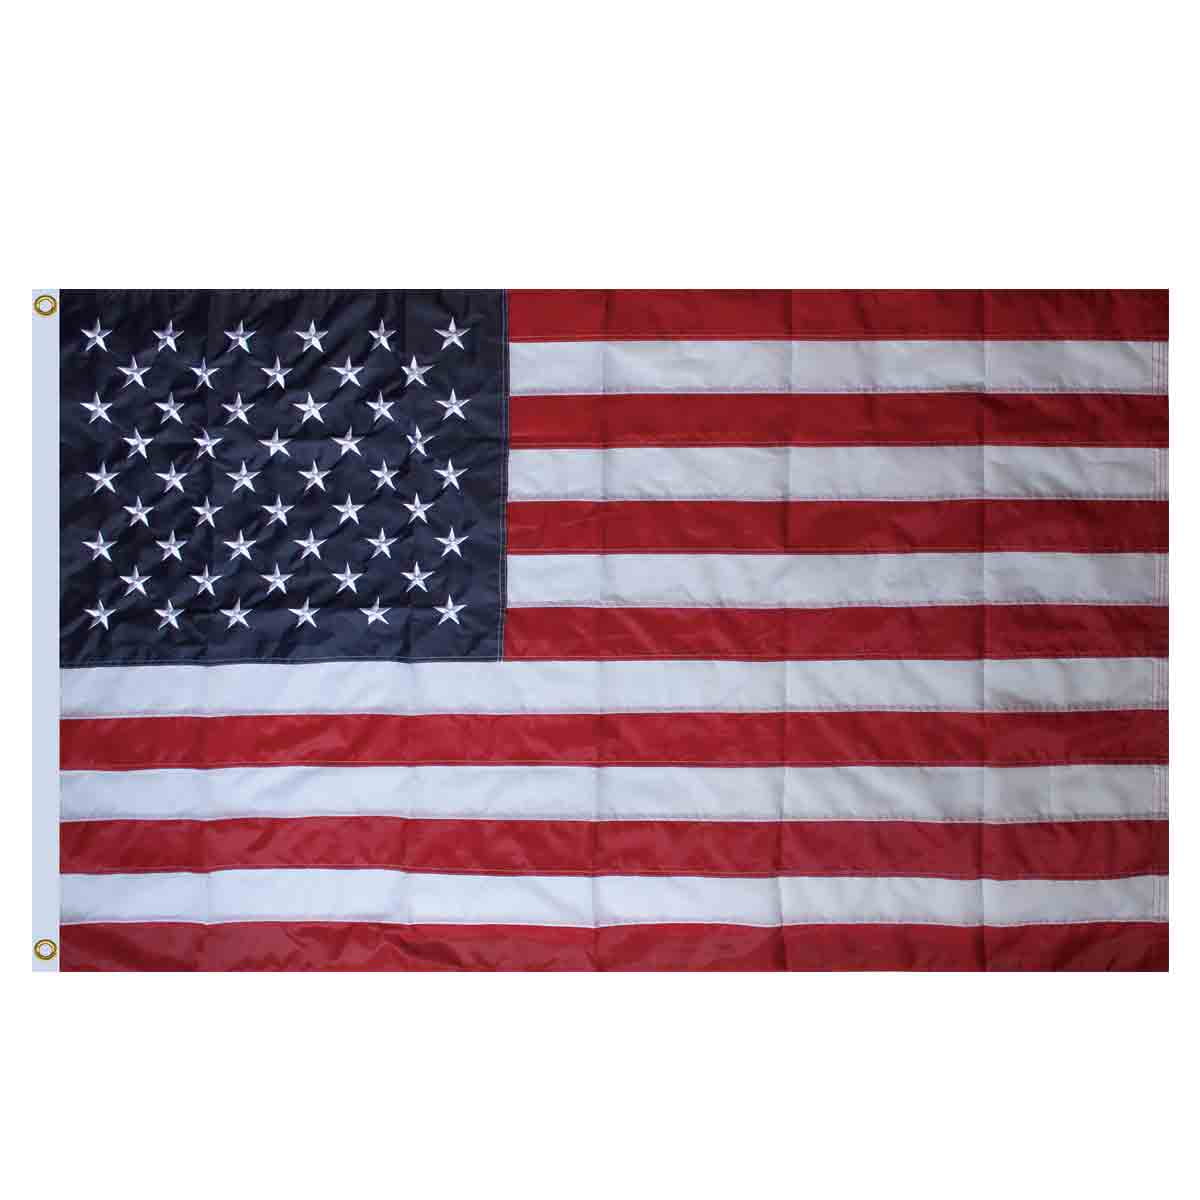 Details about   New 3’x5’ Polyester US FLAG USA American Stars Stripes United States w/ Grommets 